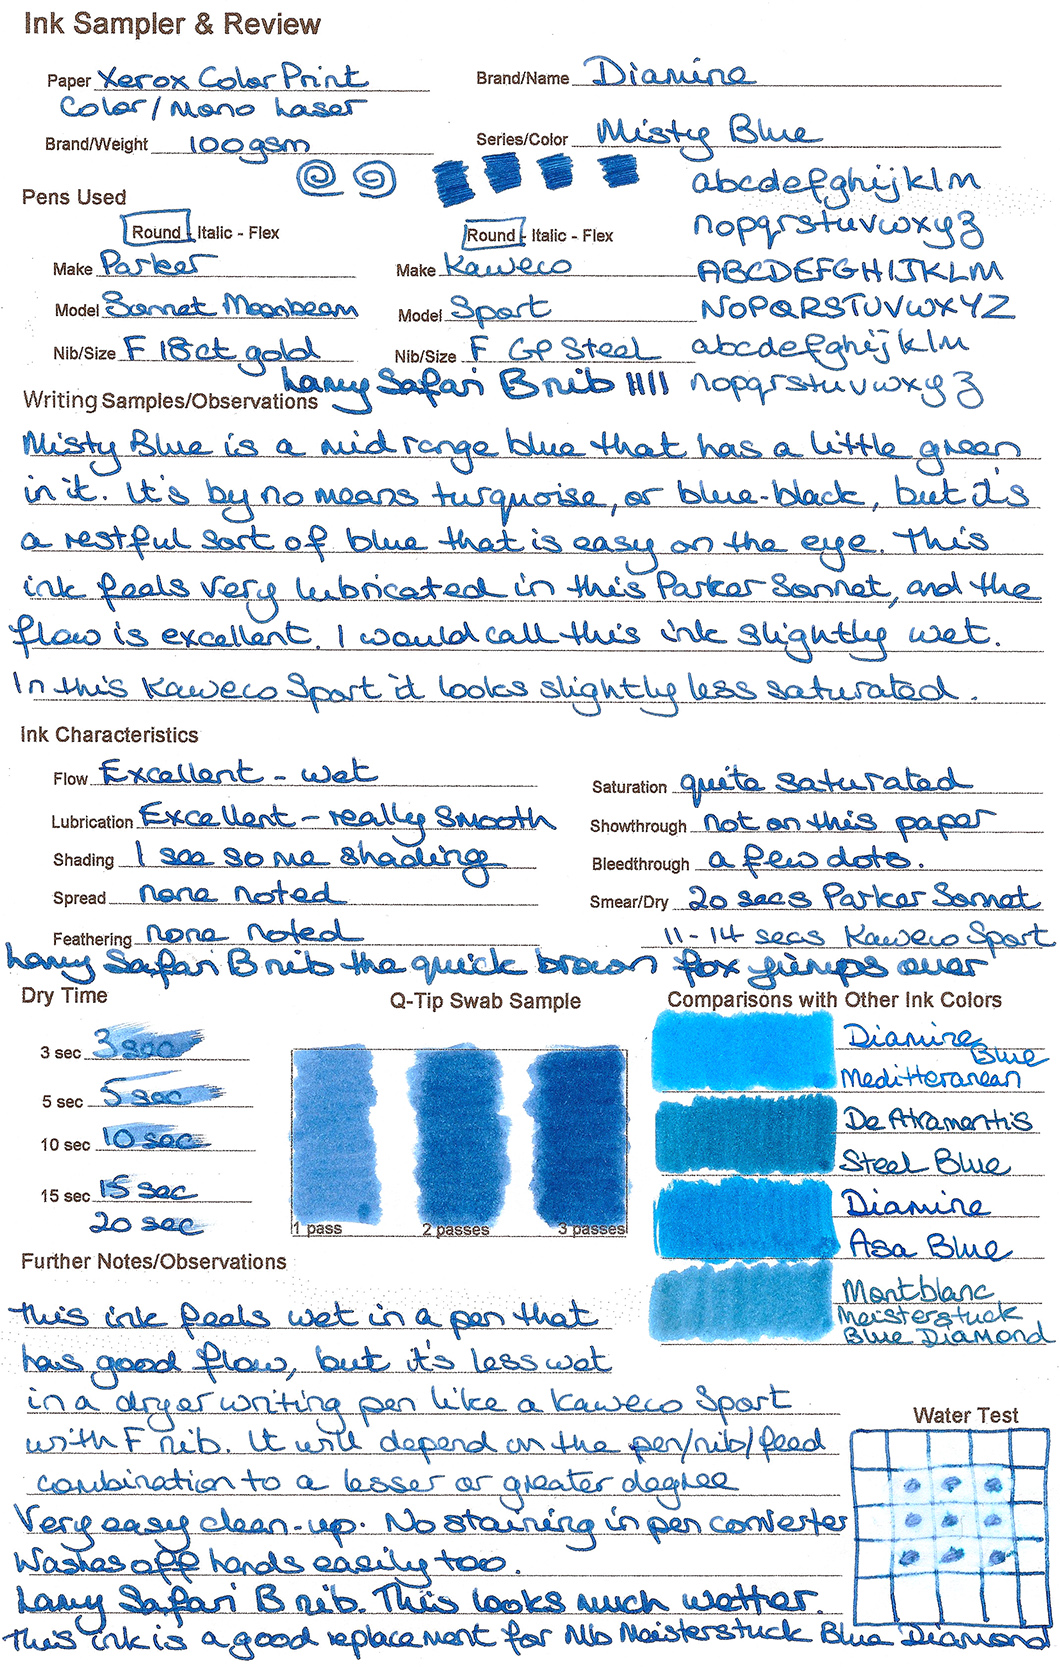 Ink Review Diamine Misty Blue Ink Reviews The Fountain Pen Network